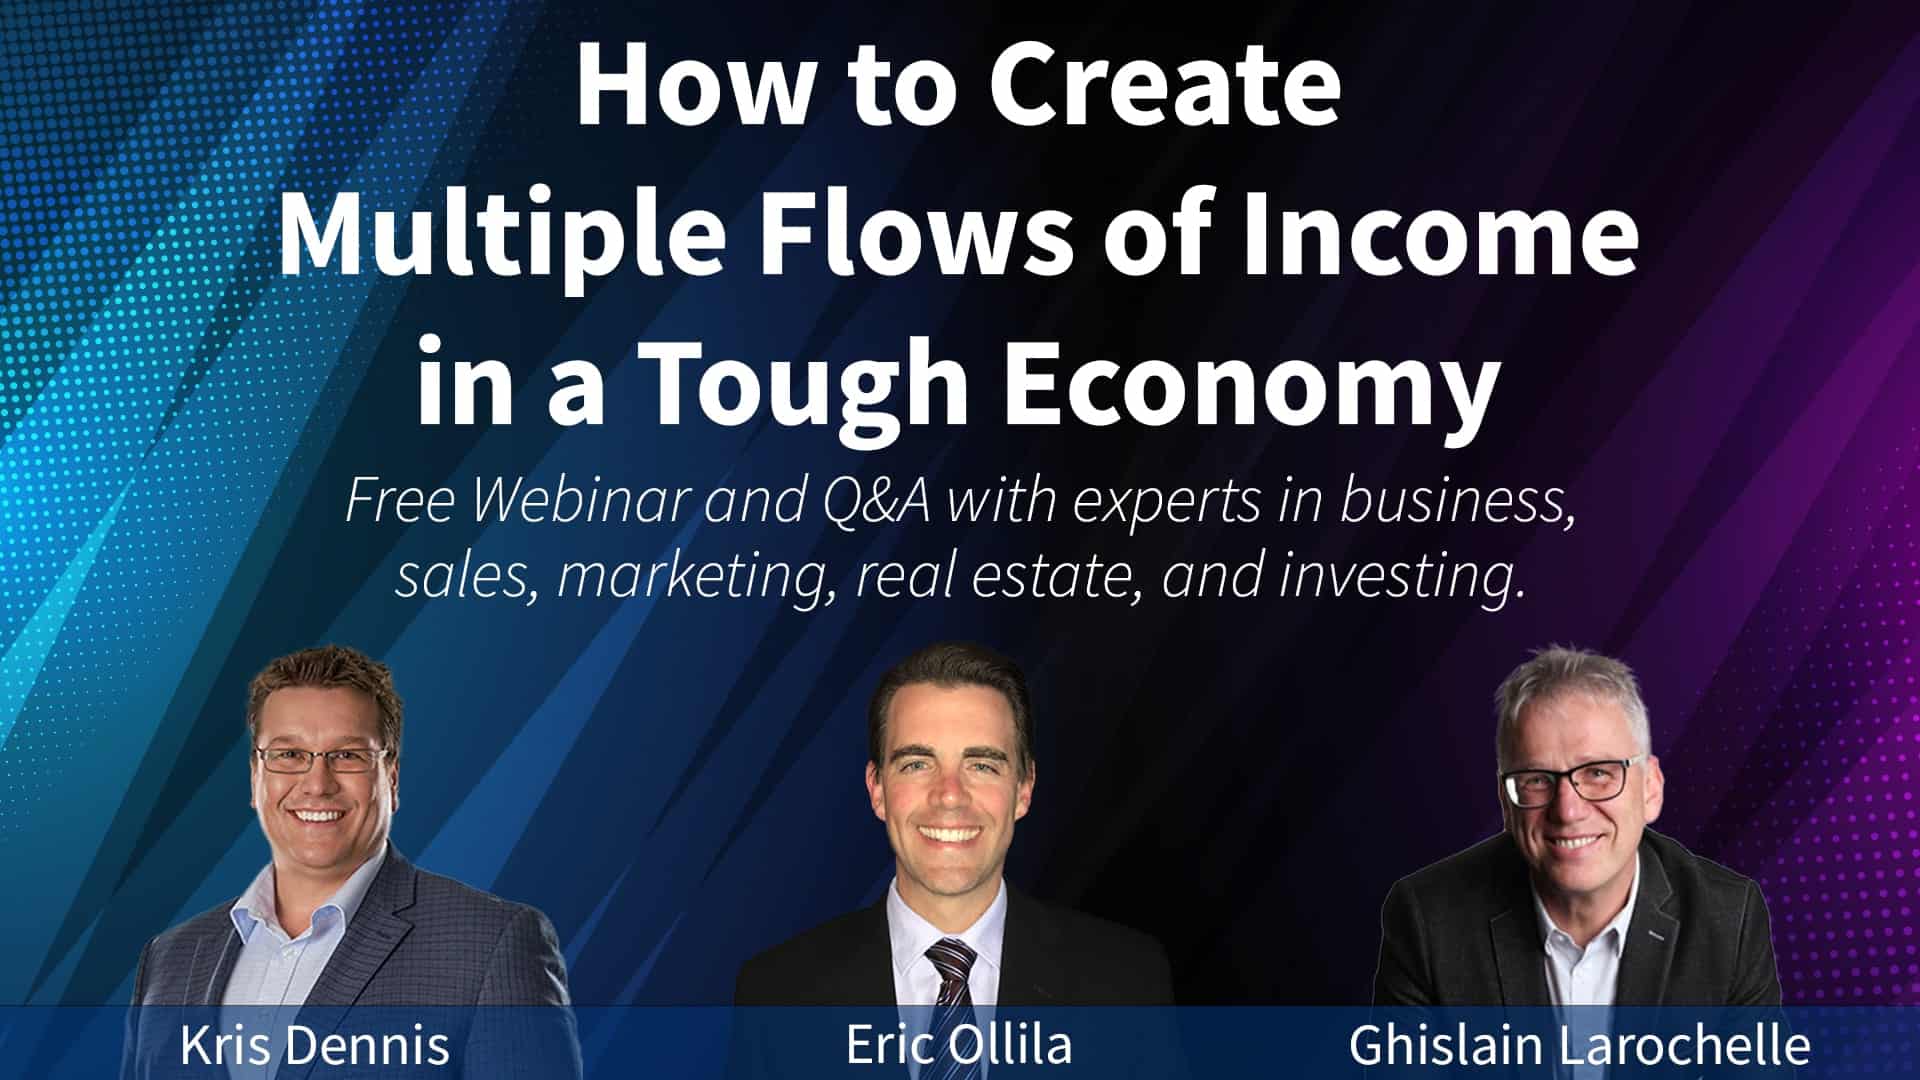 How to Create Multiple Flows of Income in a Tough Economy